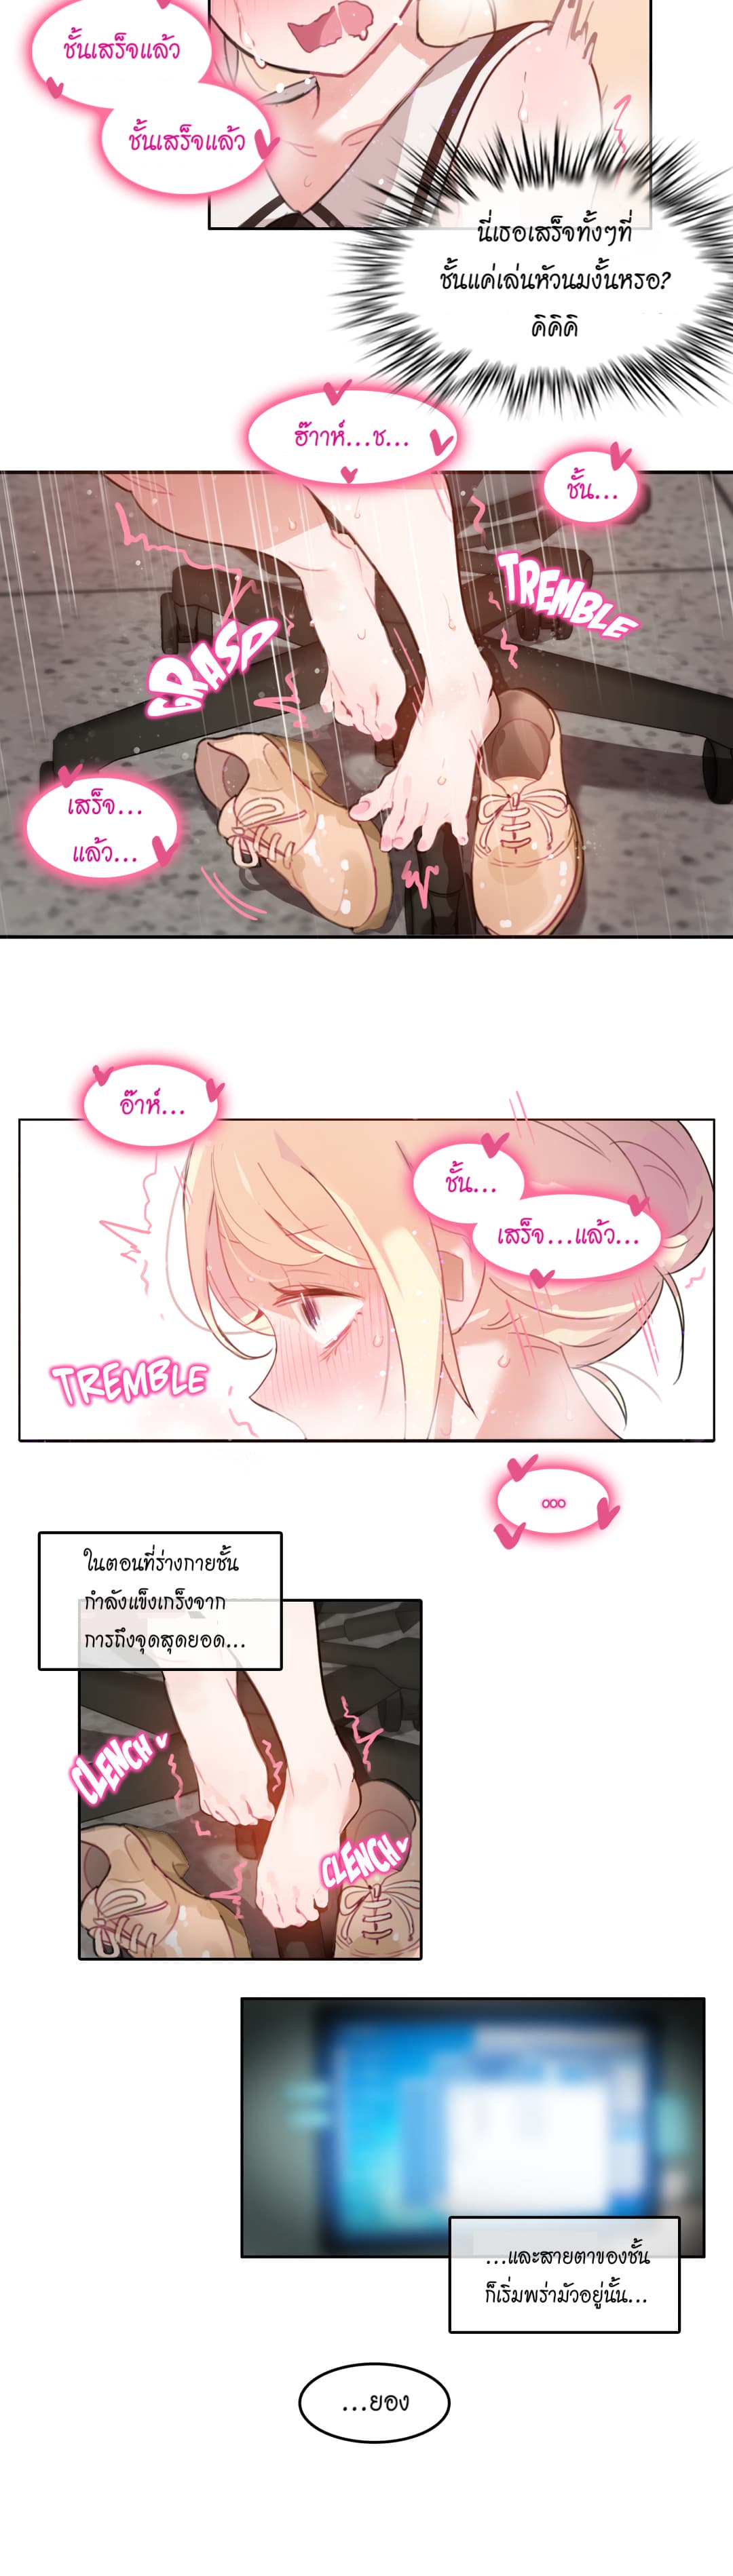 A Pervert’s Daily Life 13 (12)